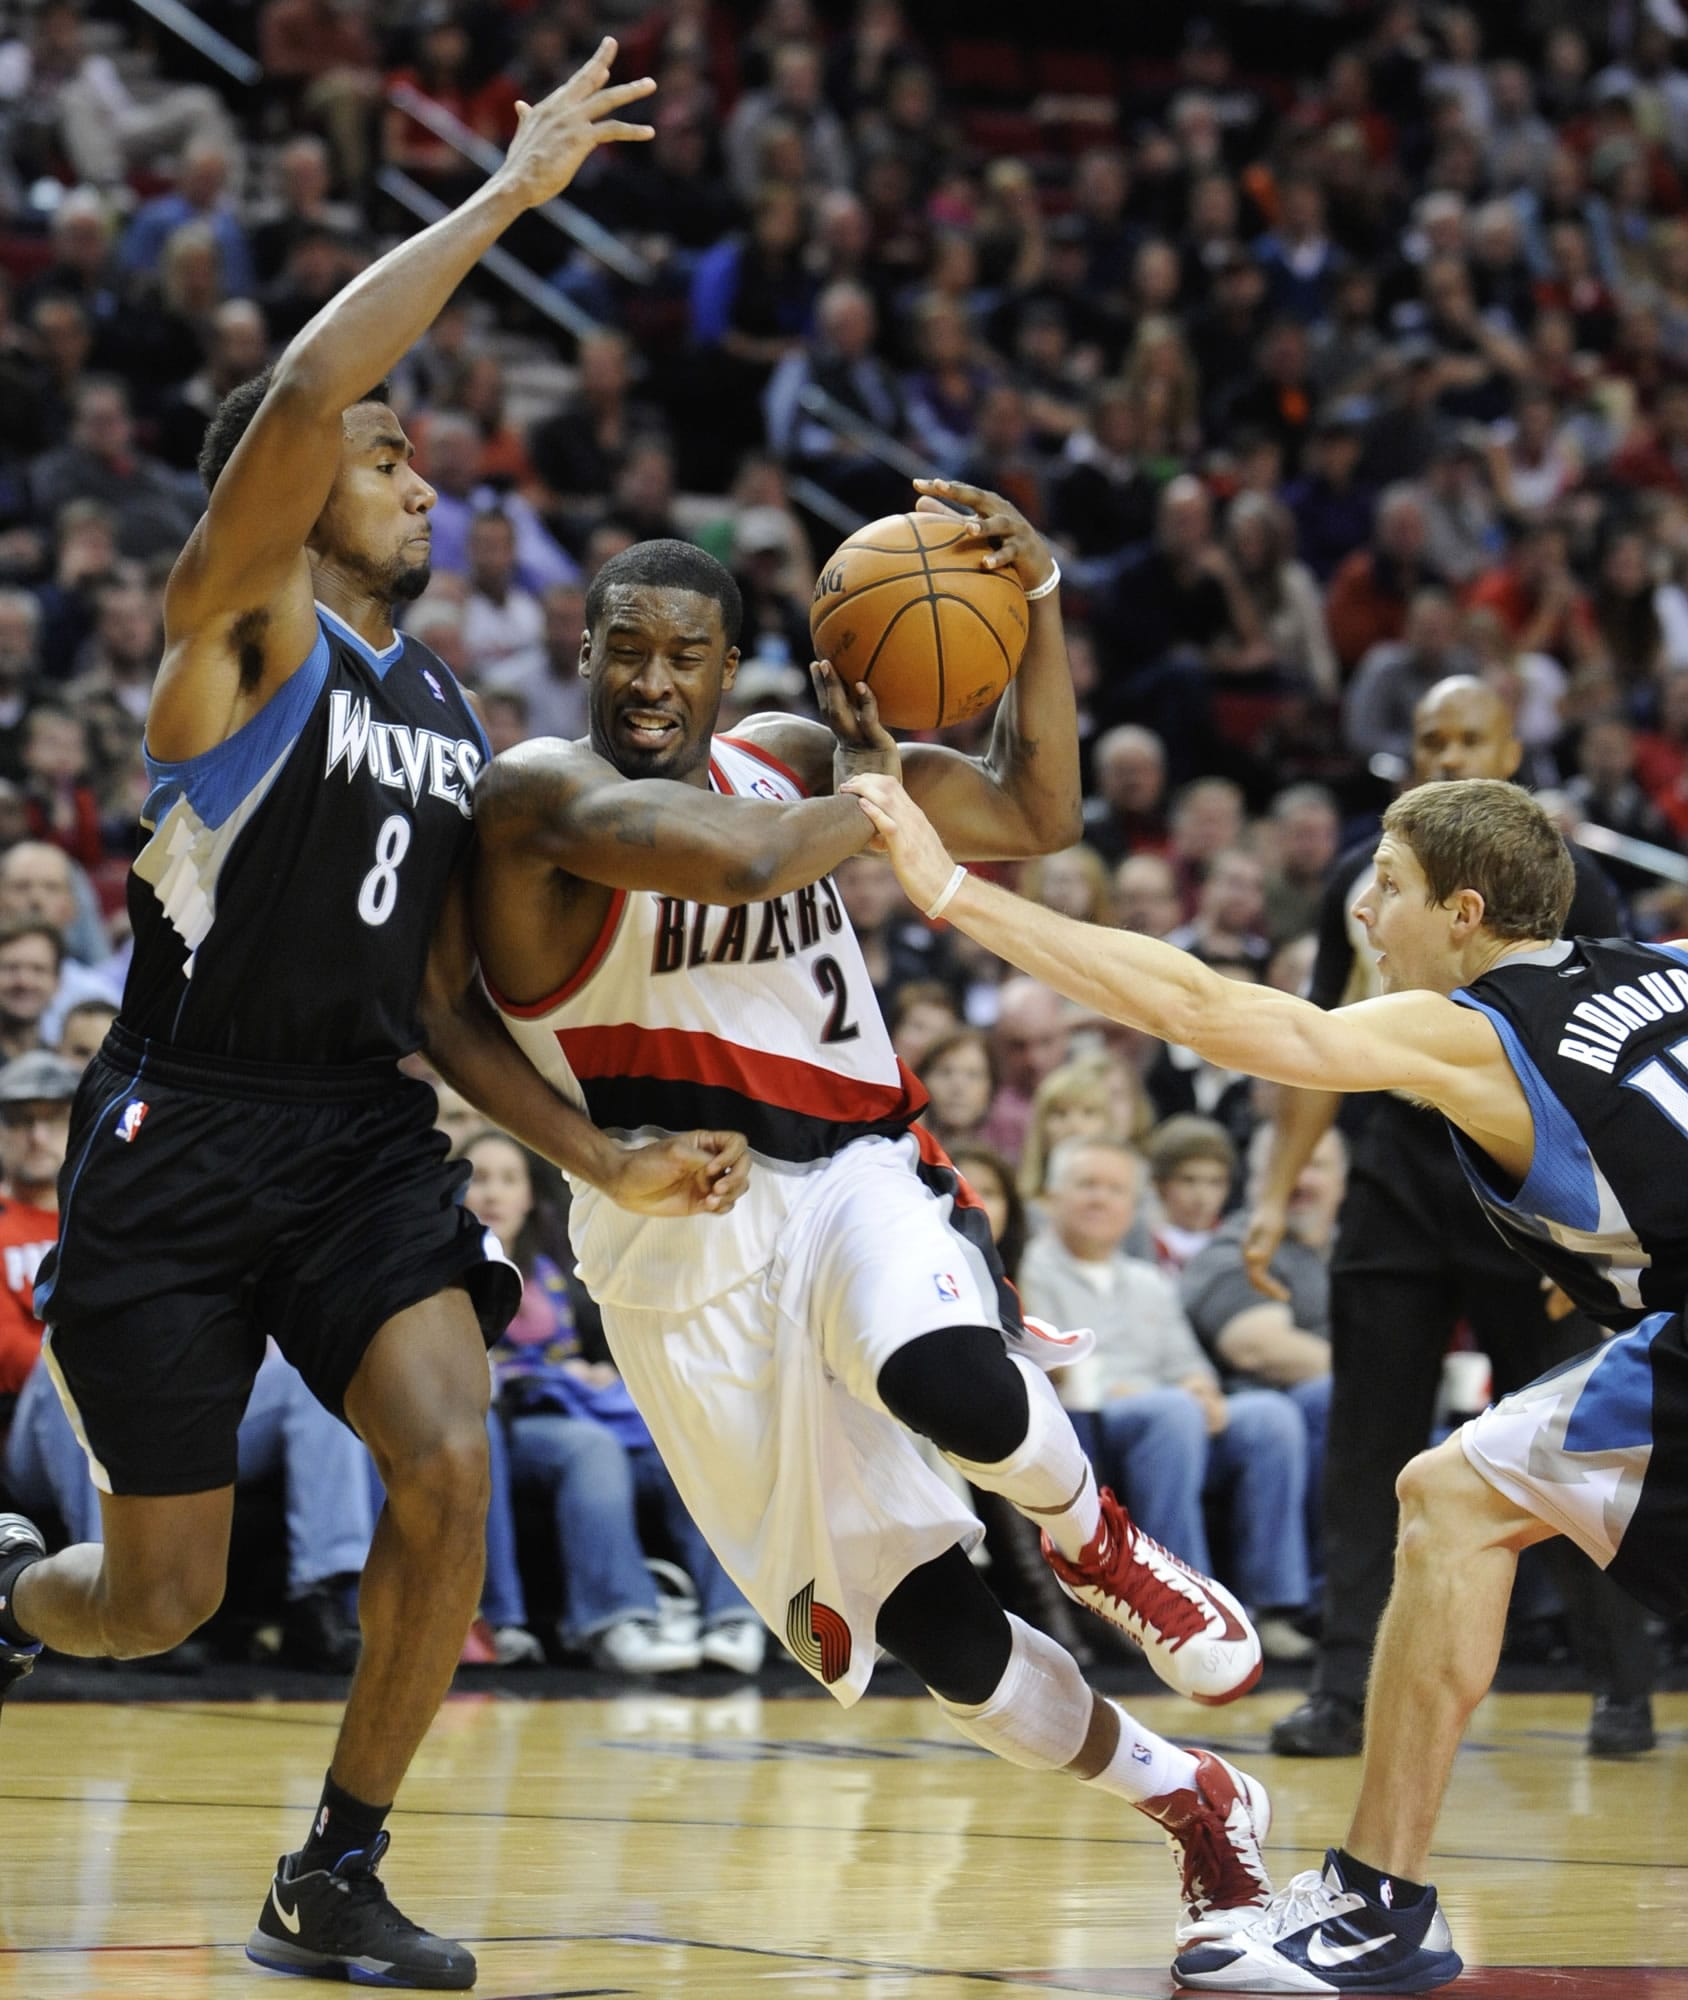 Portland Trail Blazers' Wesley Matthews (2) drives against Minnesota Timberwolves' Malcolm Lee (8) and Luke Ridnour during the second half Friday.